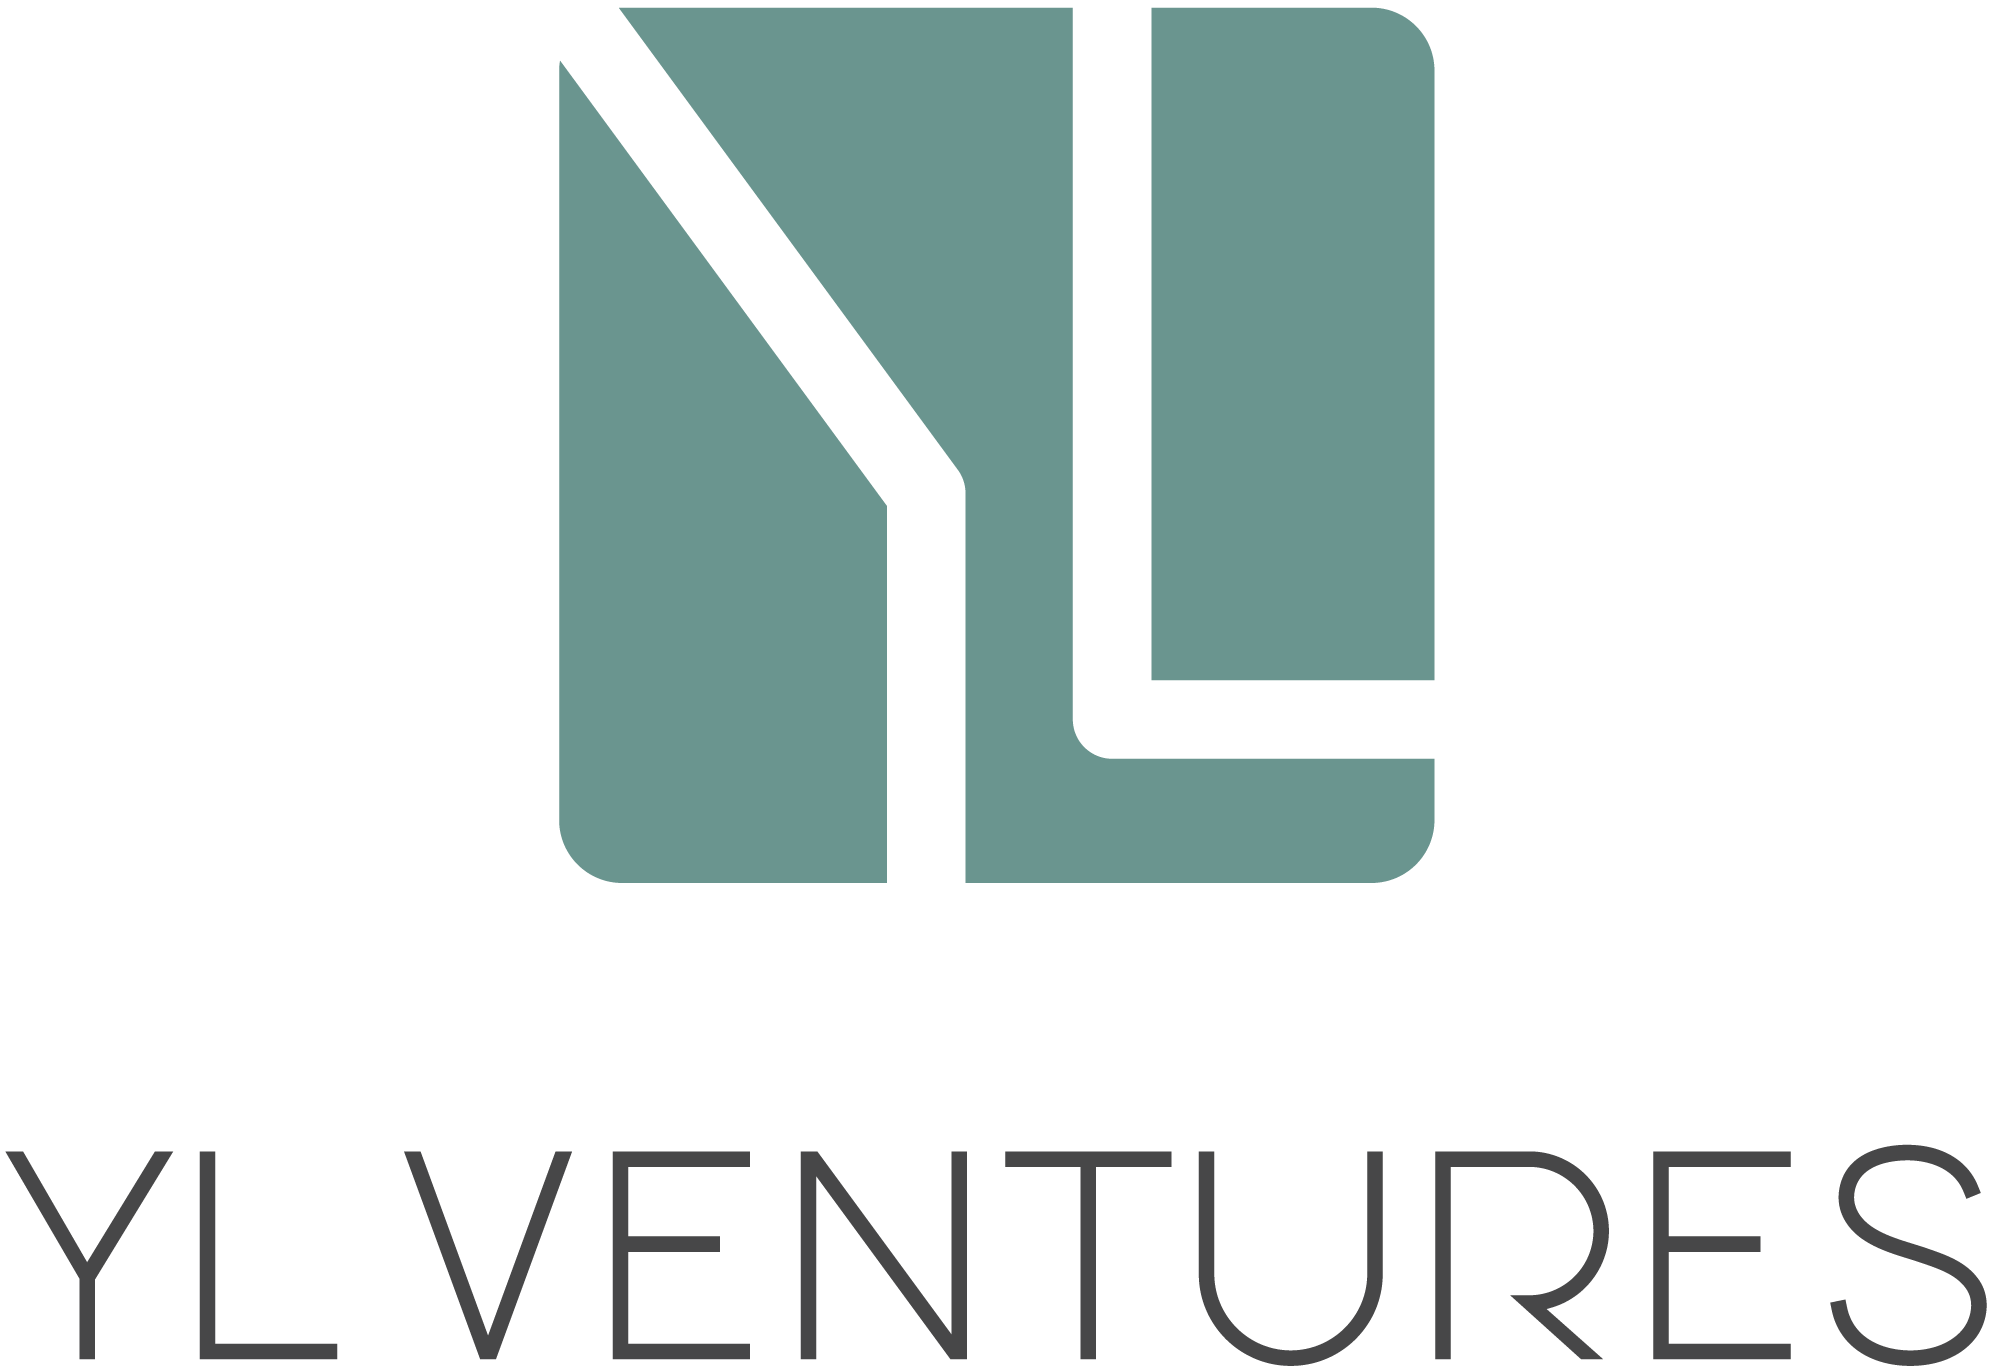 YL Ventures - From Seed to Lead